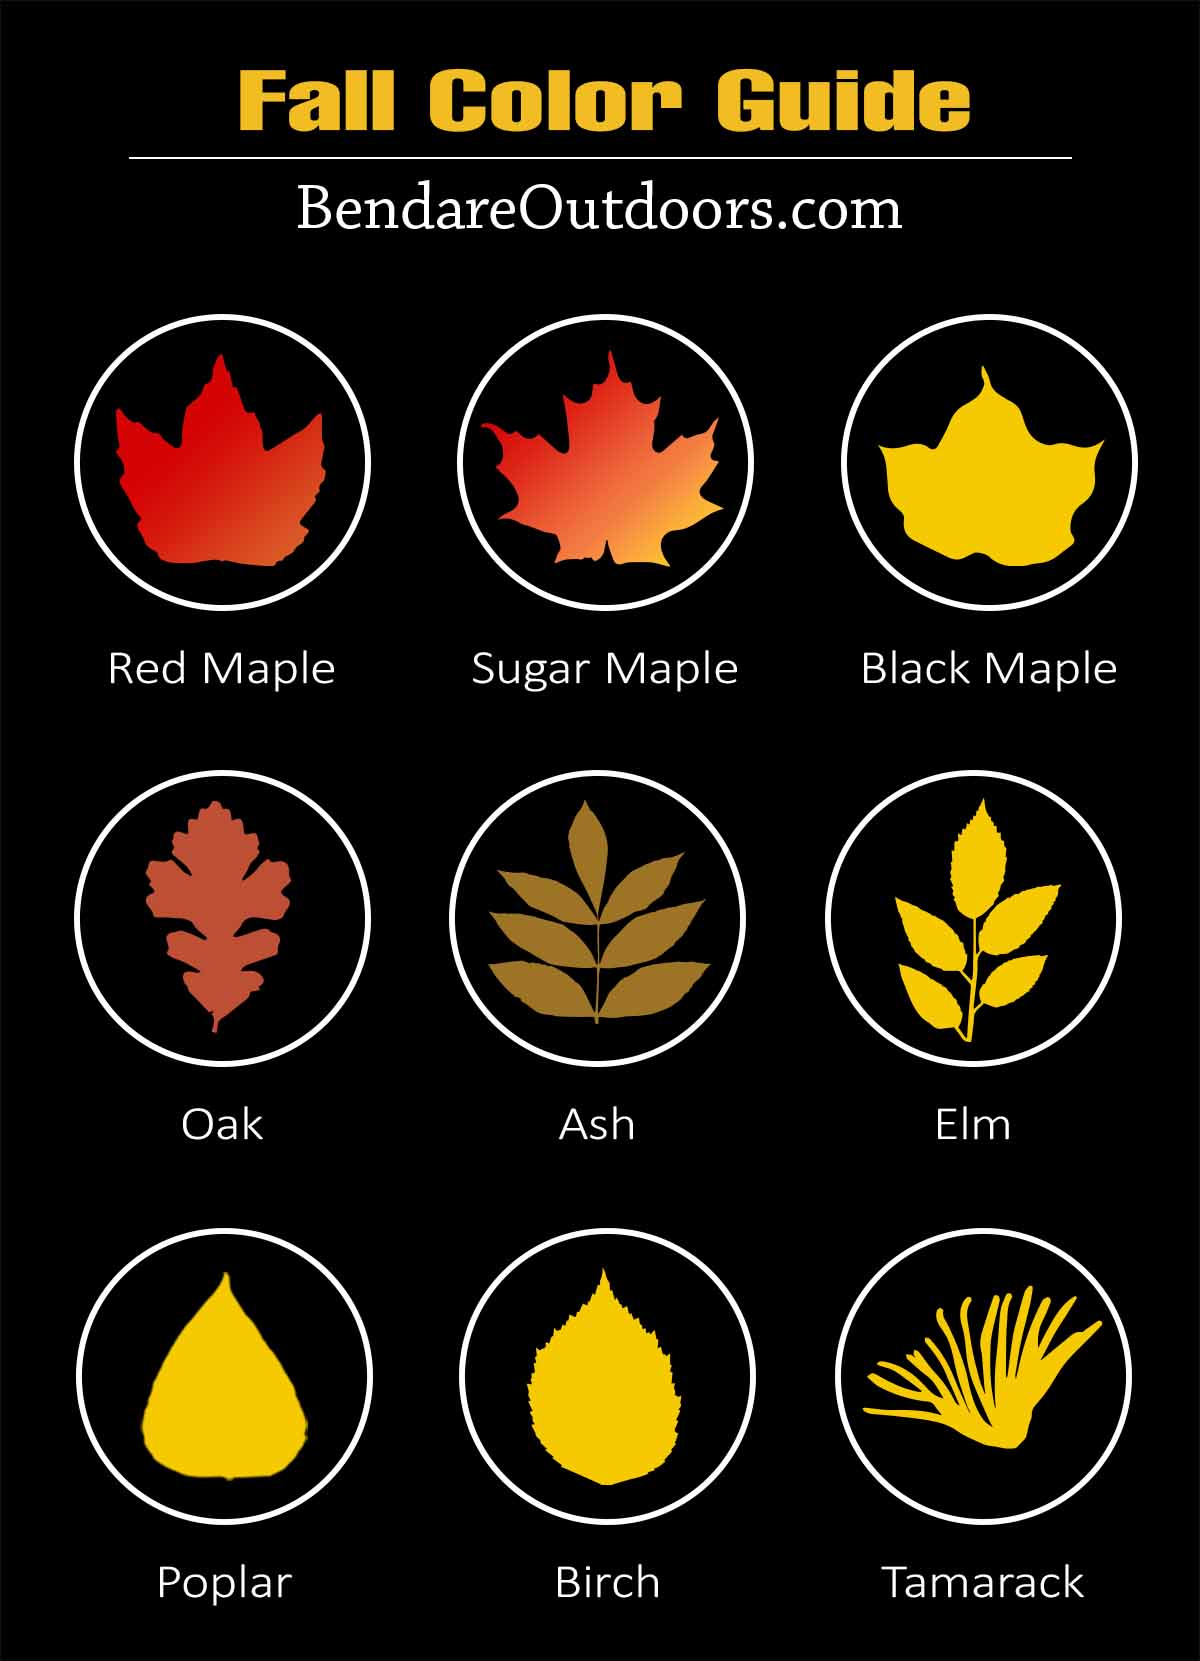 Fall color guide based on tree species by Bendare Outdoors